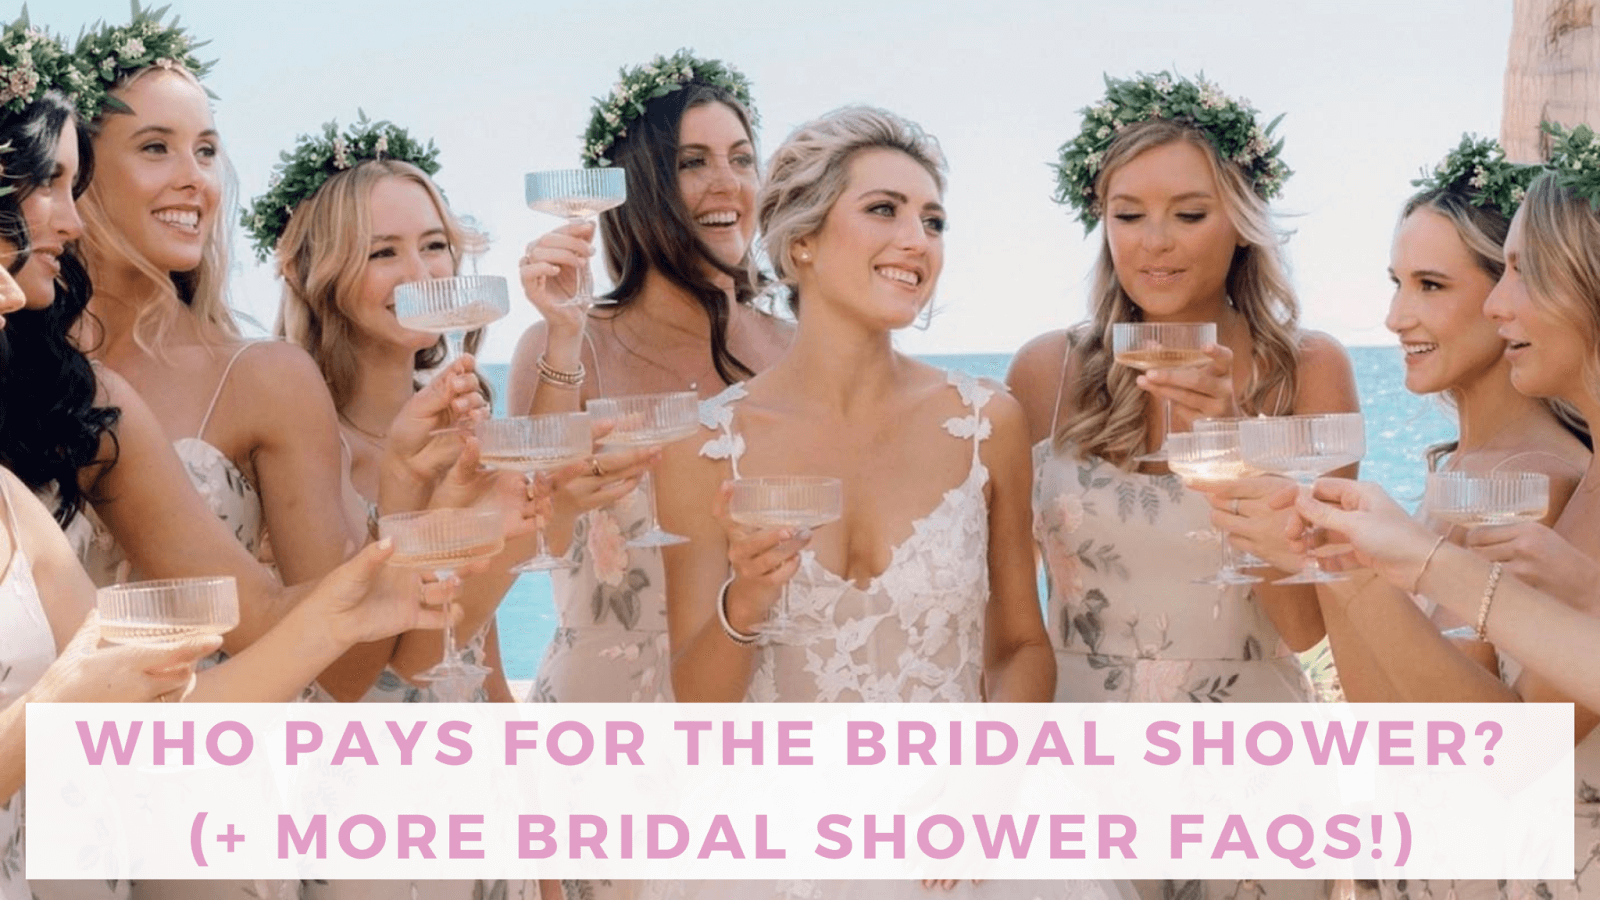 Bridal Shower vs. Bachelorette Party: What's the Difference